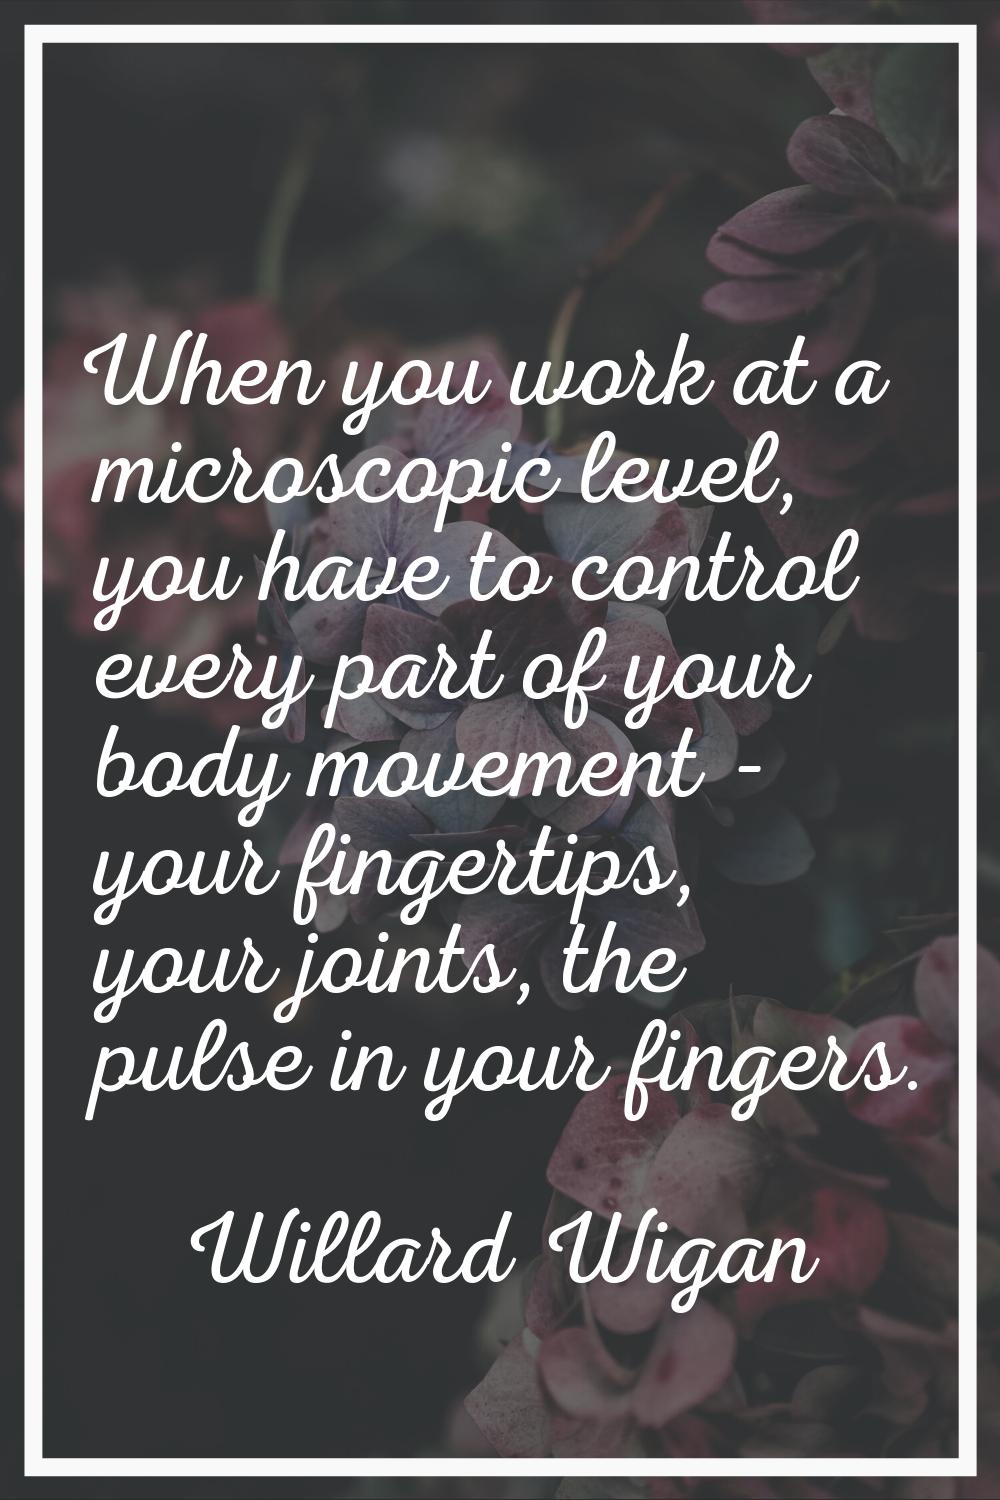 When you work at a microscopic level, you have to control every part of your body movement - your f